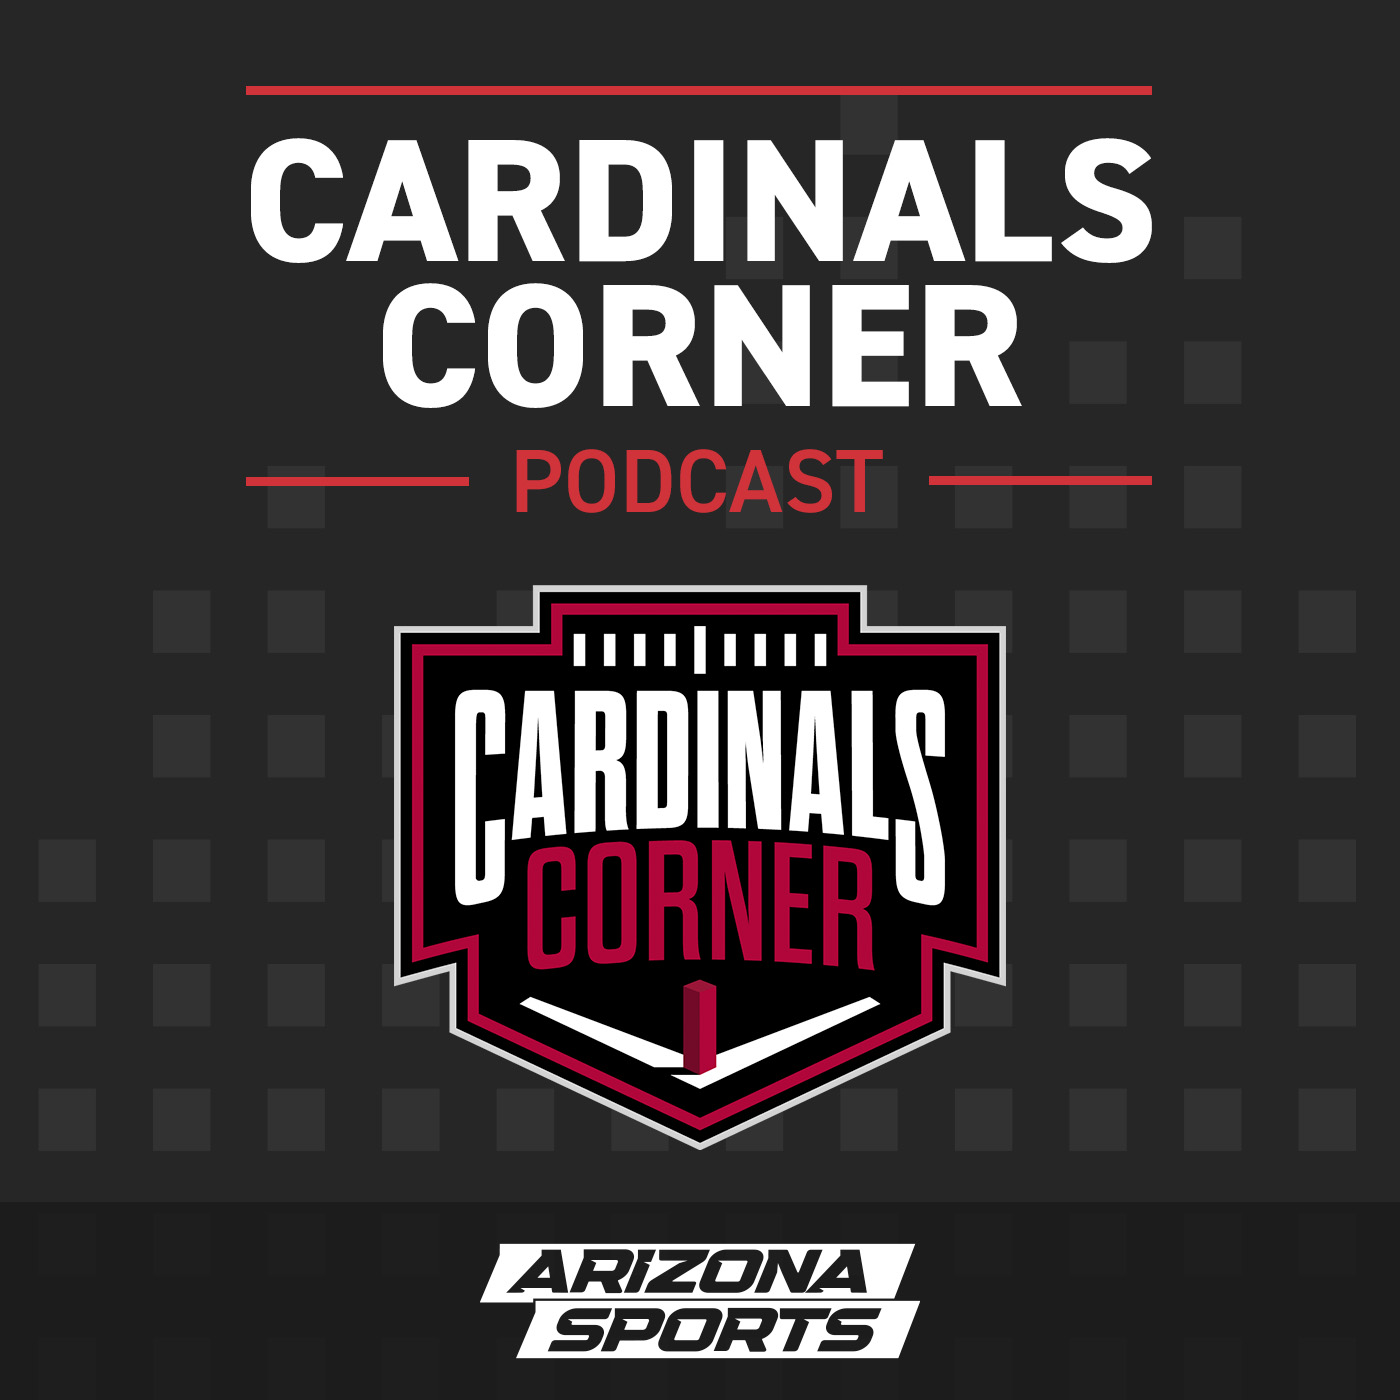 Should we ALREADY have faith in the new Arizona Cardinals regime? - June 9